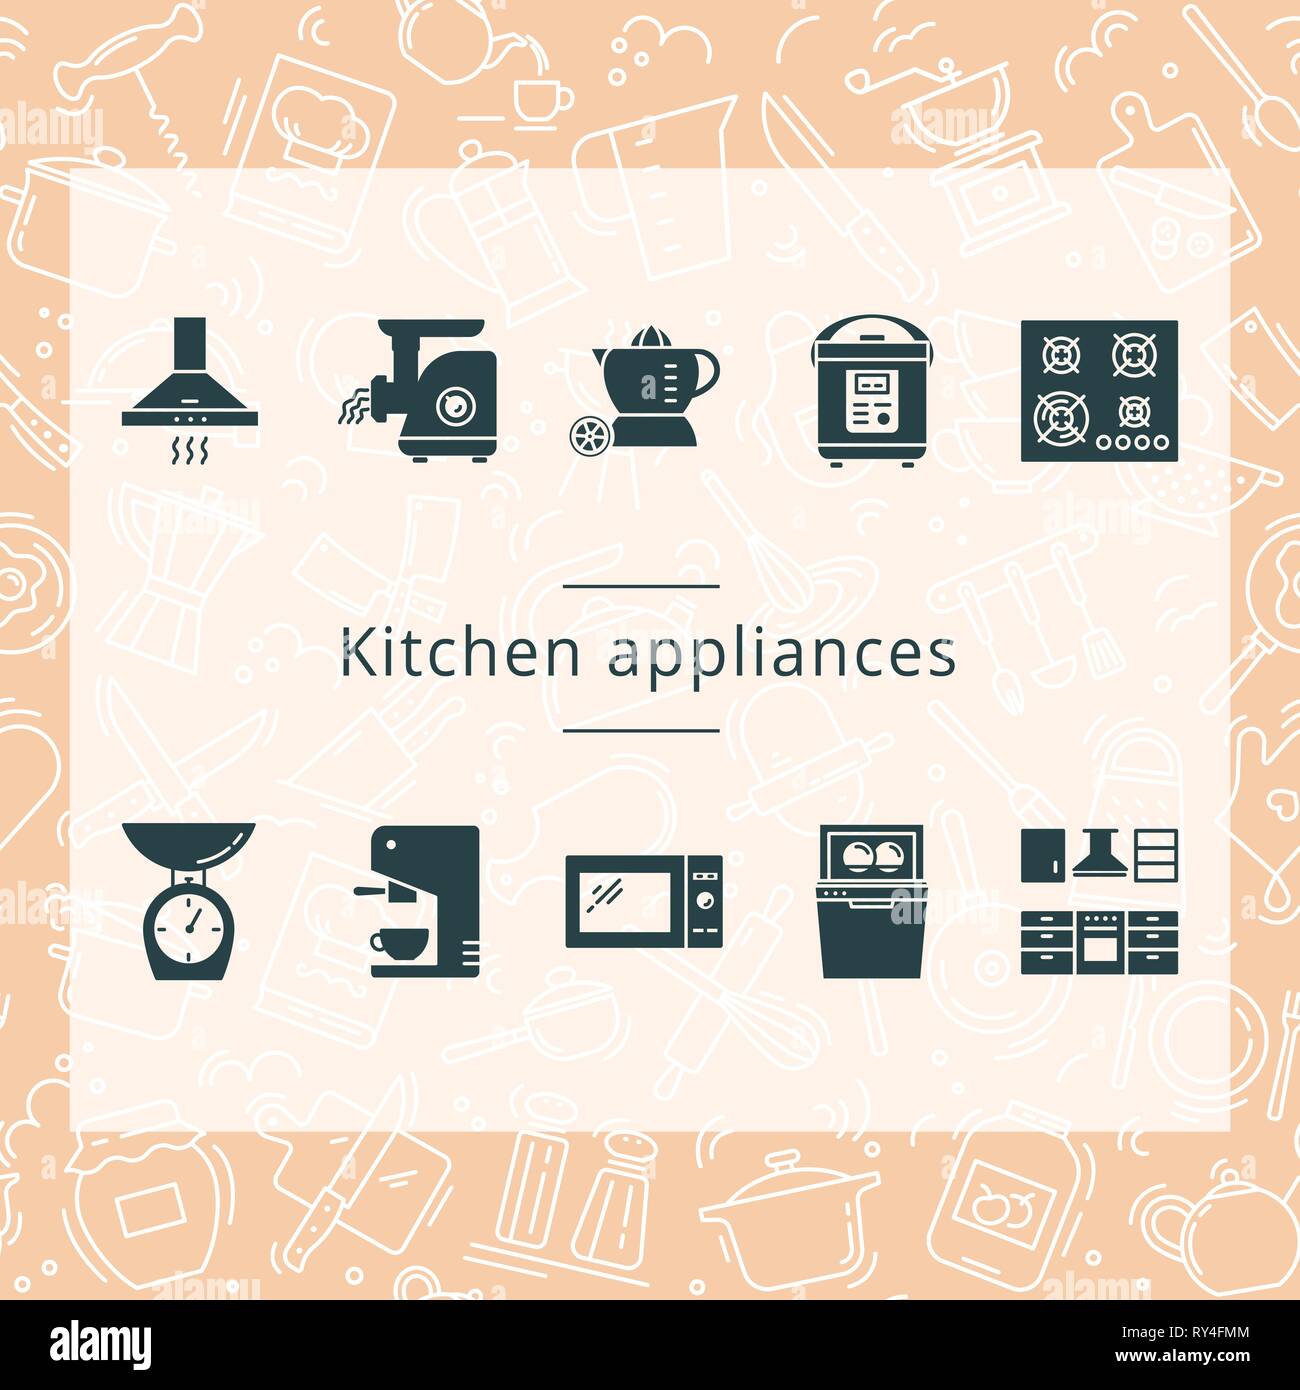 Set of kitchen appliances isolated from the background. Stock Vector